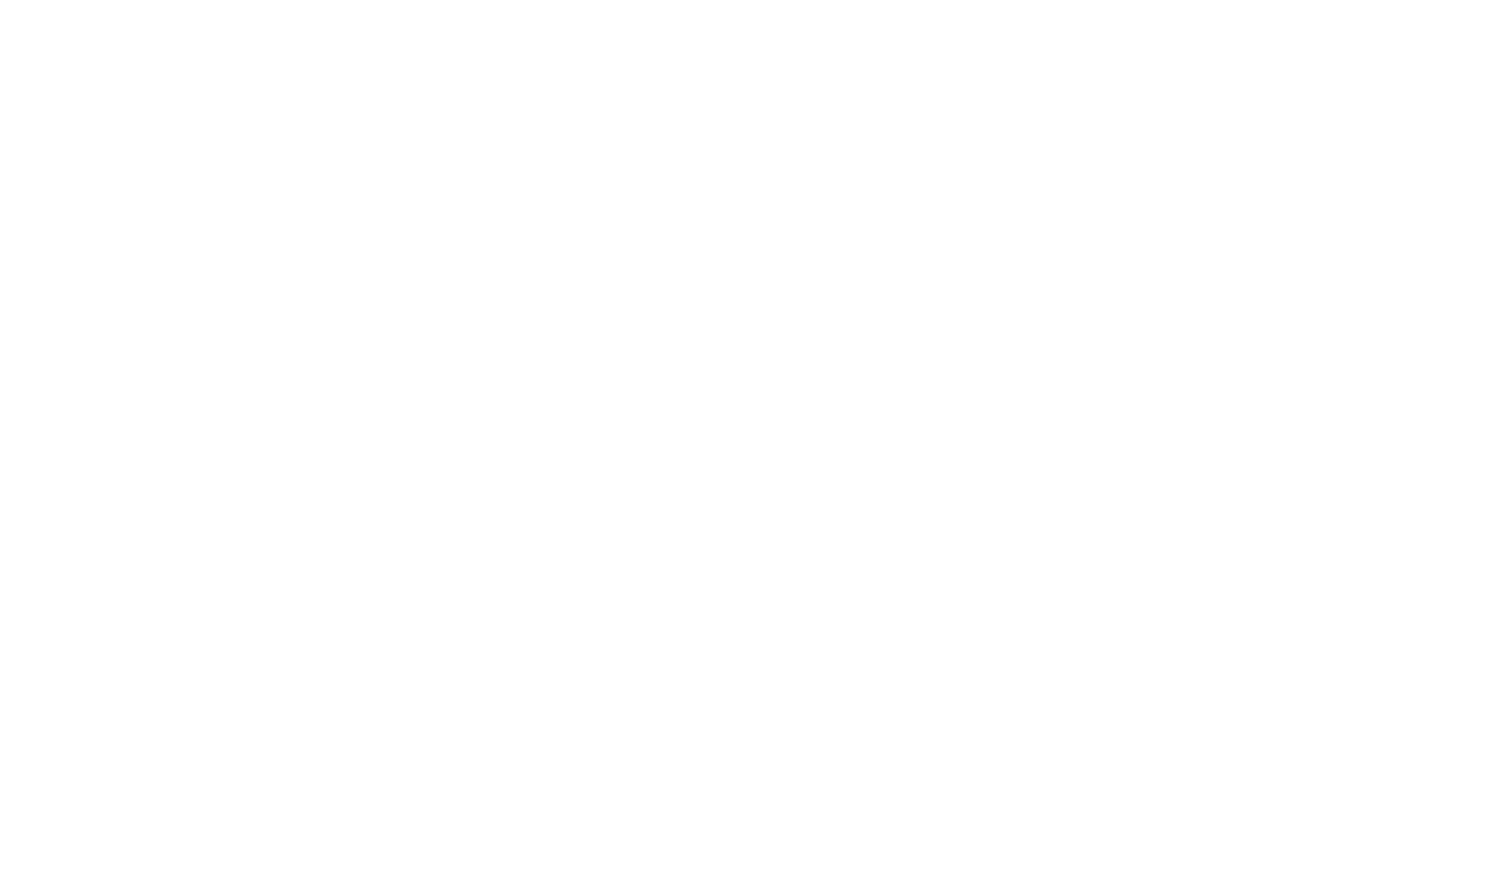 Your personal challenge